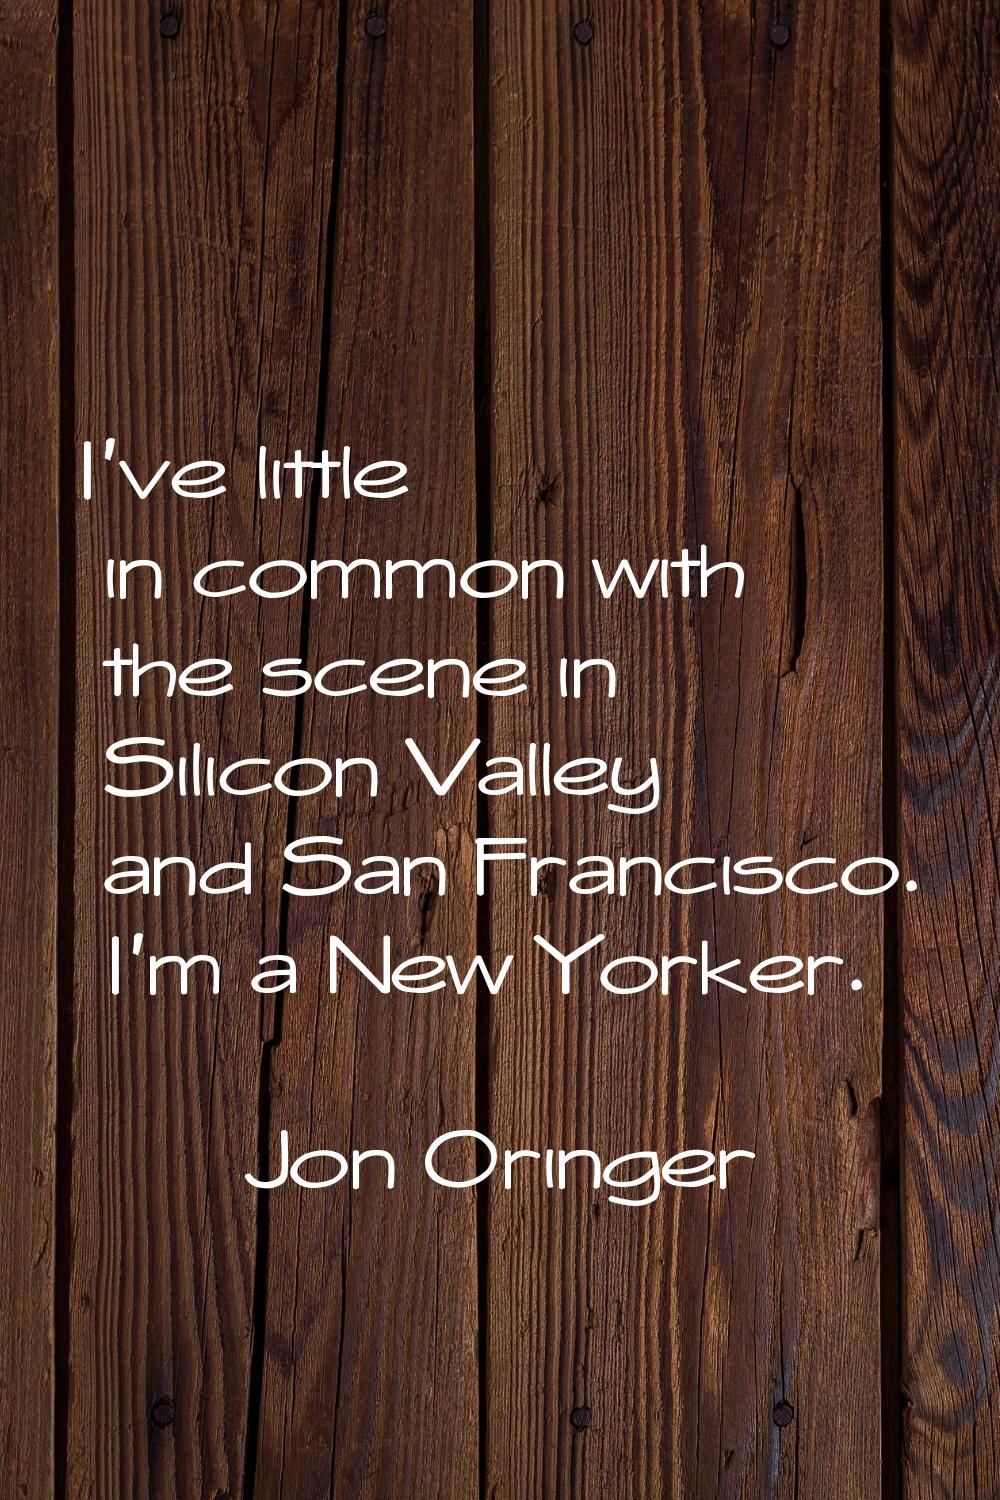 I've little in common with the scene in Silicon Valley and San Francisco. I'm a New Yorker.